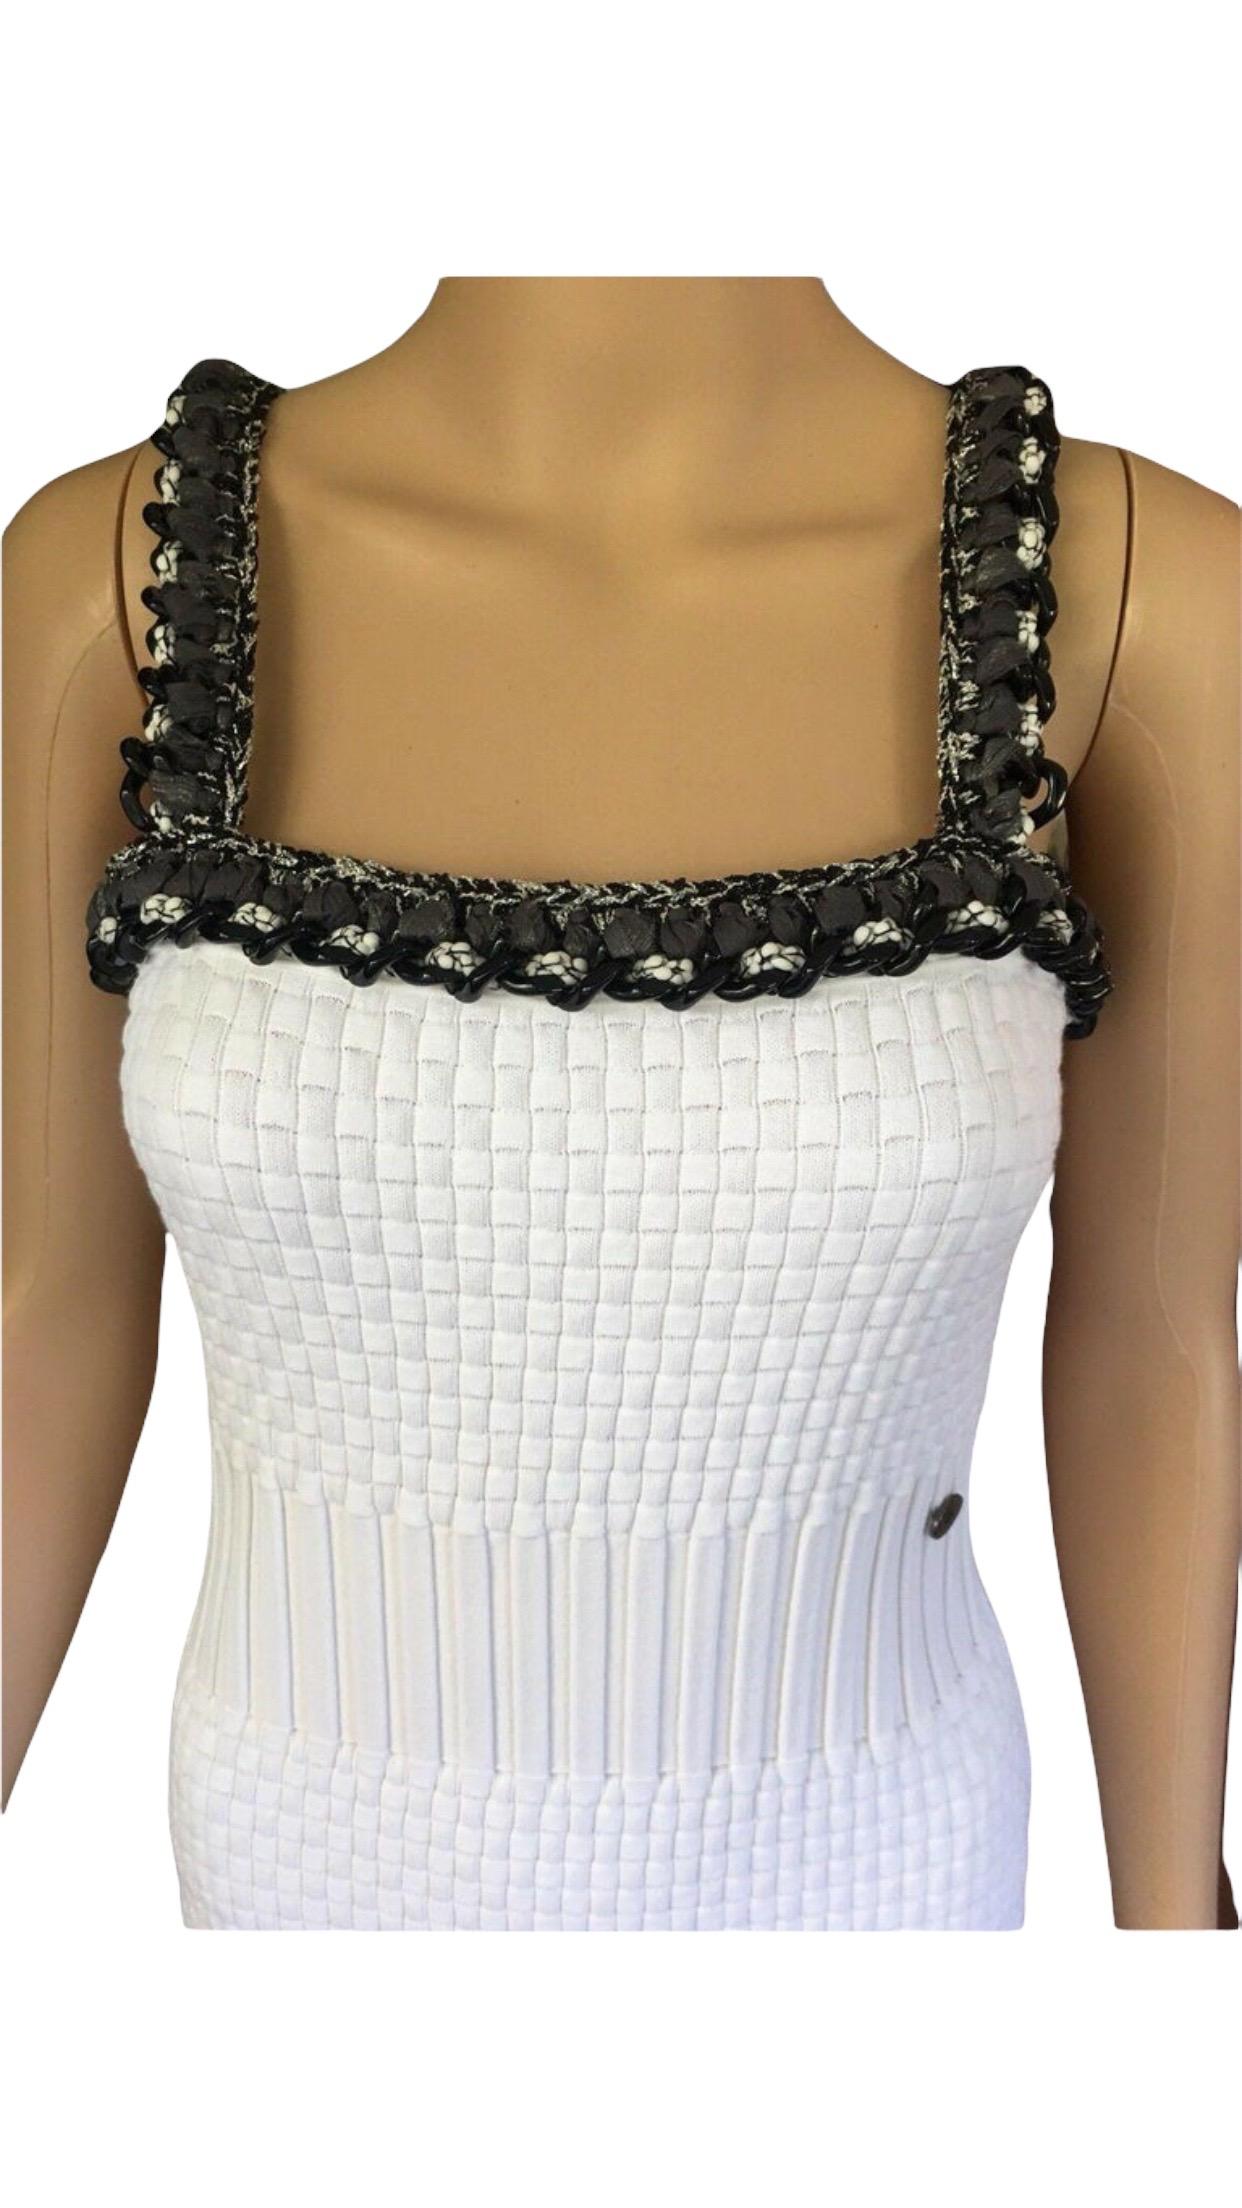 New Chanel S/S 2014 Runway Knit Chain Embellished Trim White Mini Dress For Sale 1